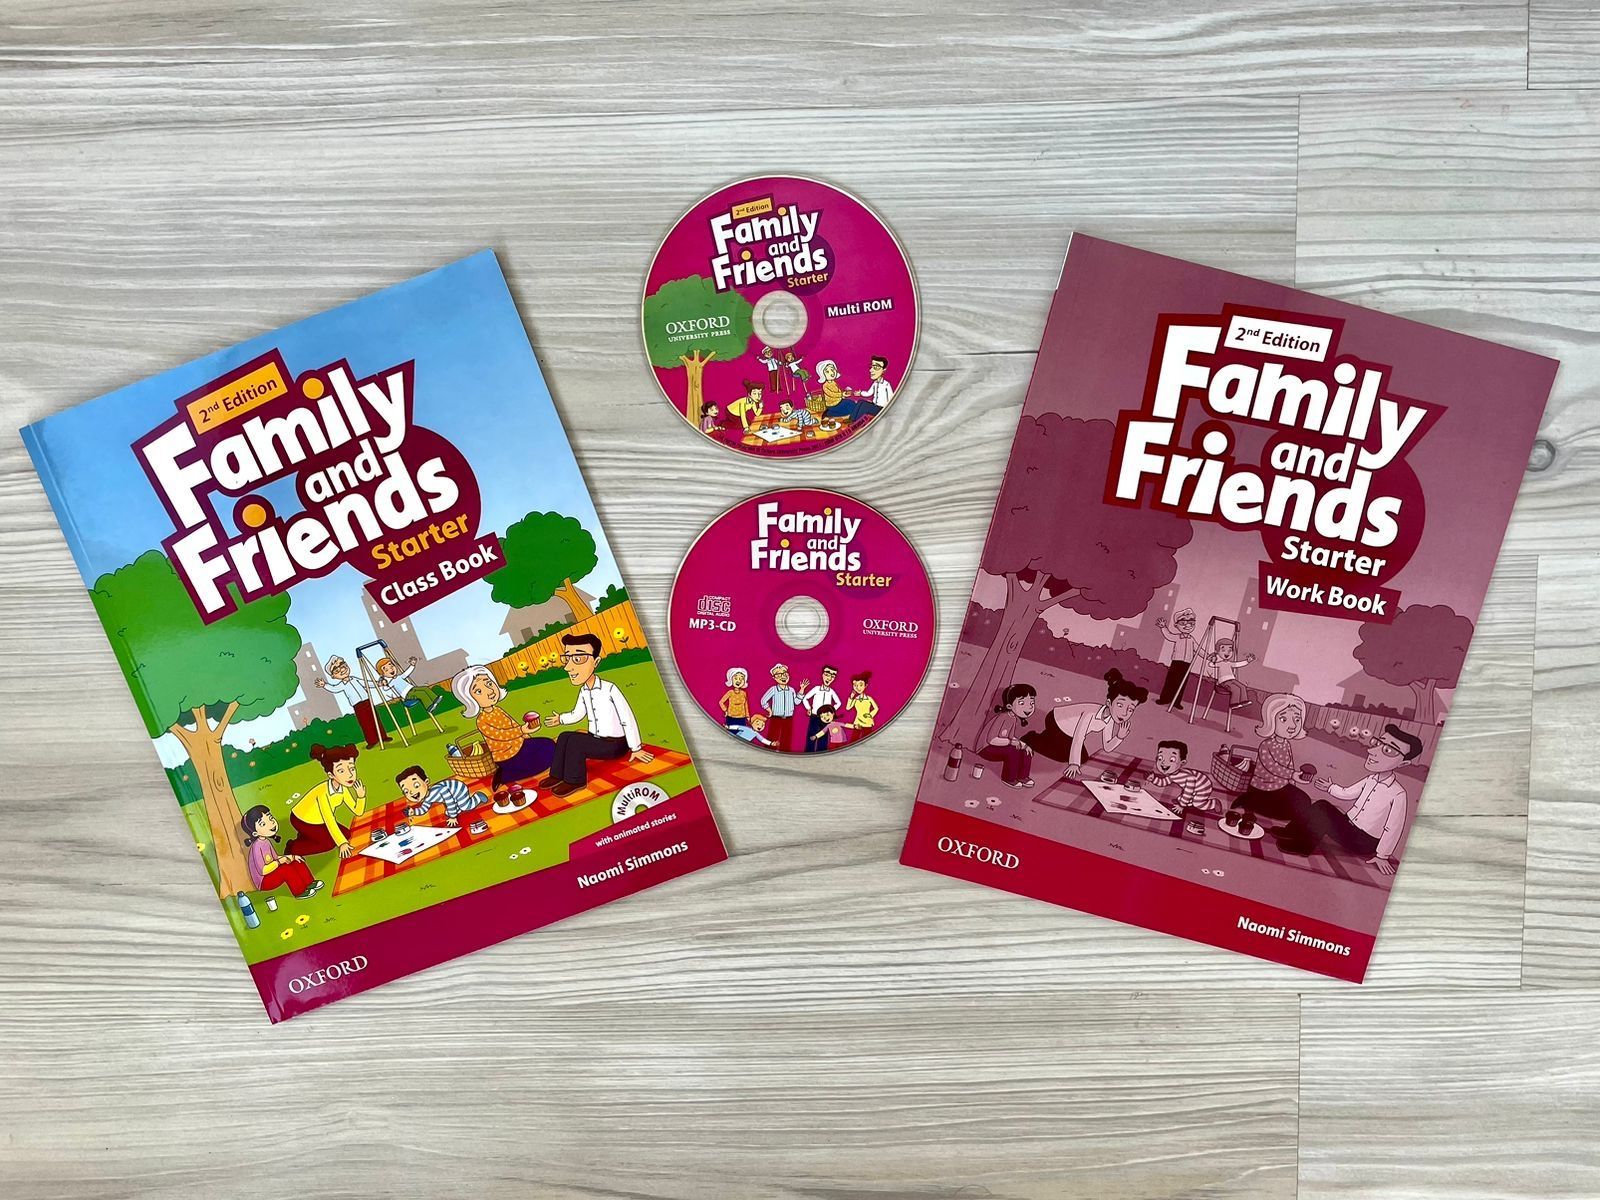 Family and friends starter book. Family and friends 2 2nd Edition Classbook. Комплект Family and friends 1 (2nd Edition) class book + Workbook + CD. Family and friends Starter class book. Family and friends 3 2nd Edition.